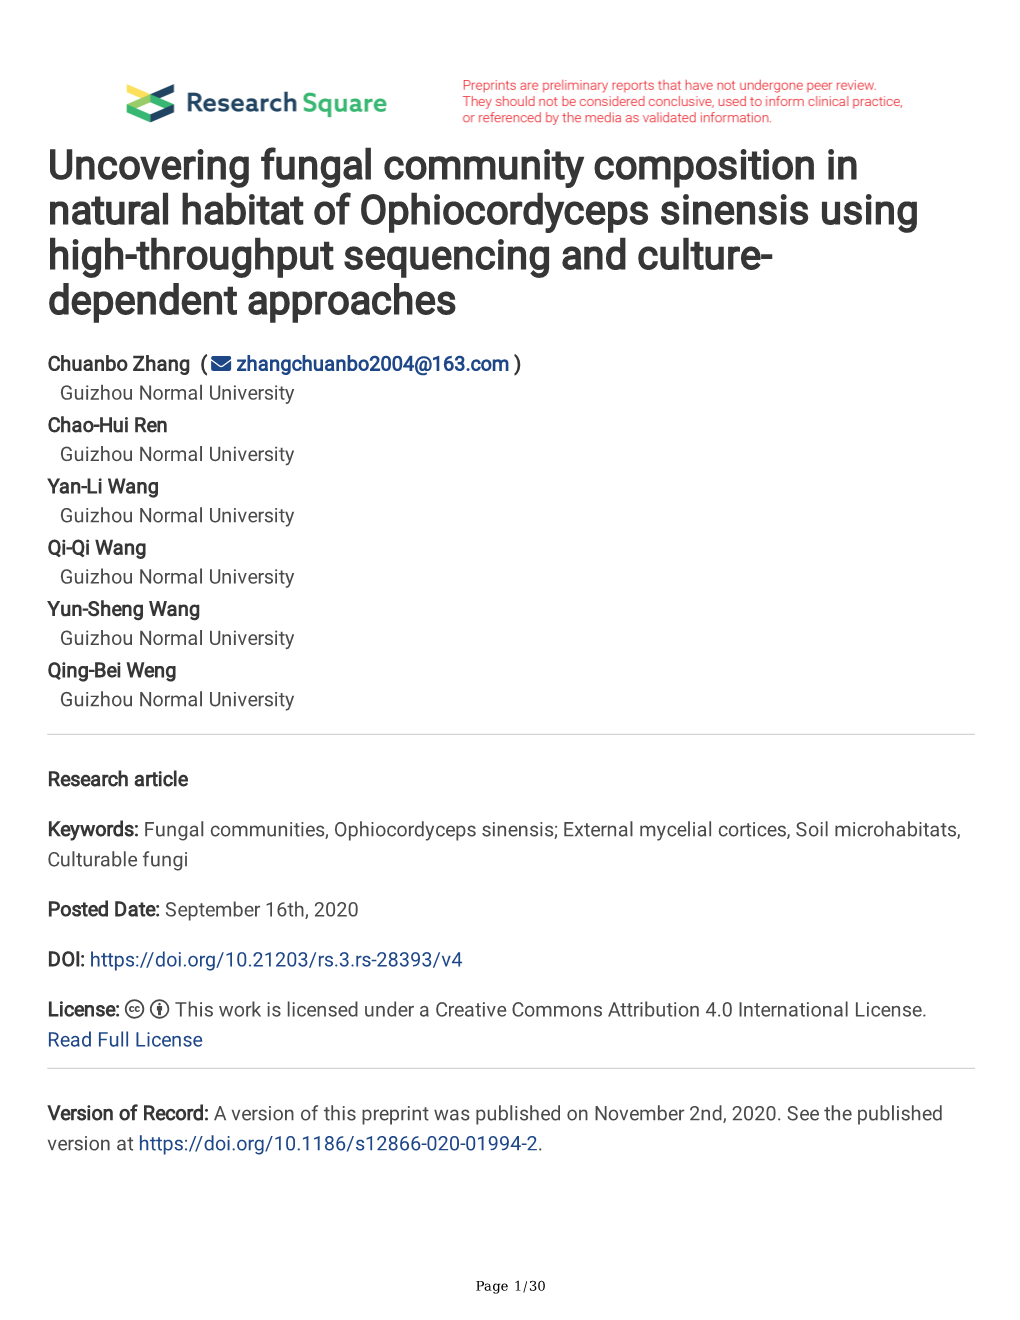 Uncovering Fungal Community Composition in Natural Habitat of Ophiocordyceps Sinensis Using High-Throughput Sequencing and Culture- Dependent Approaches